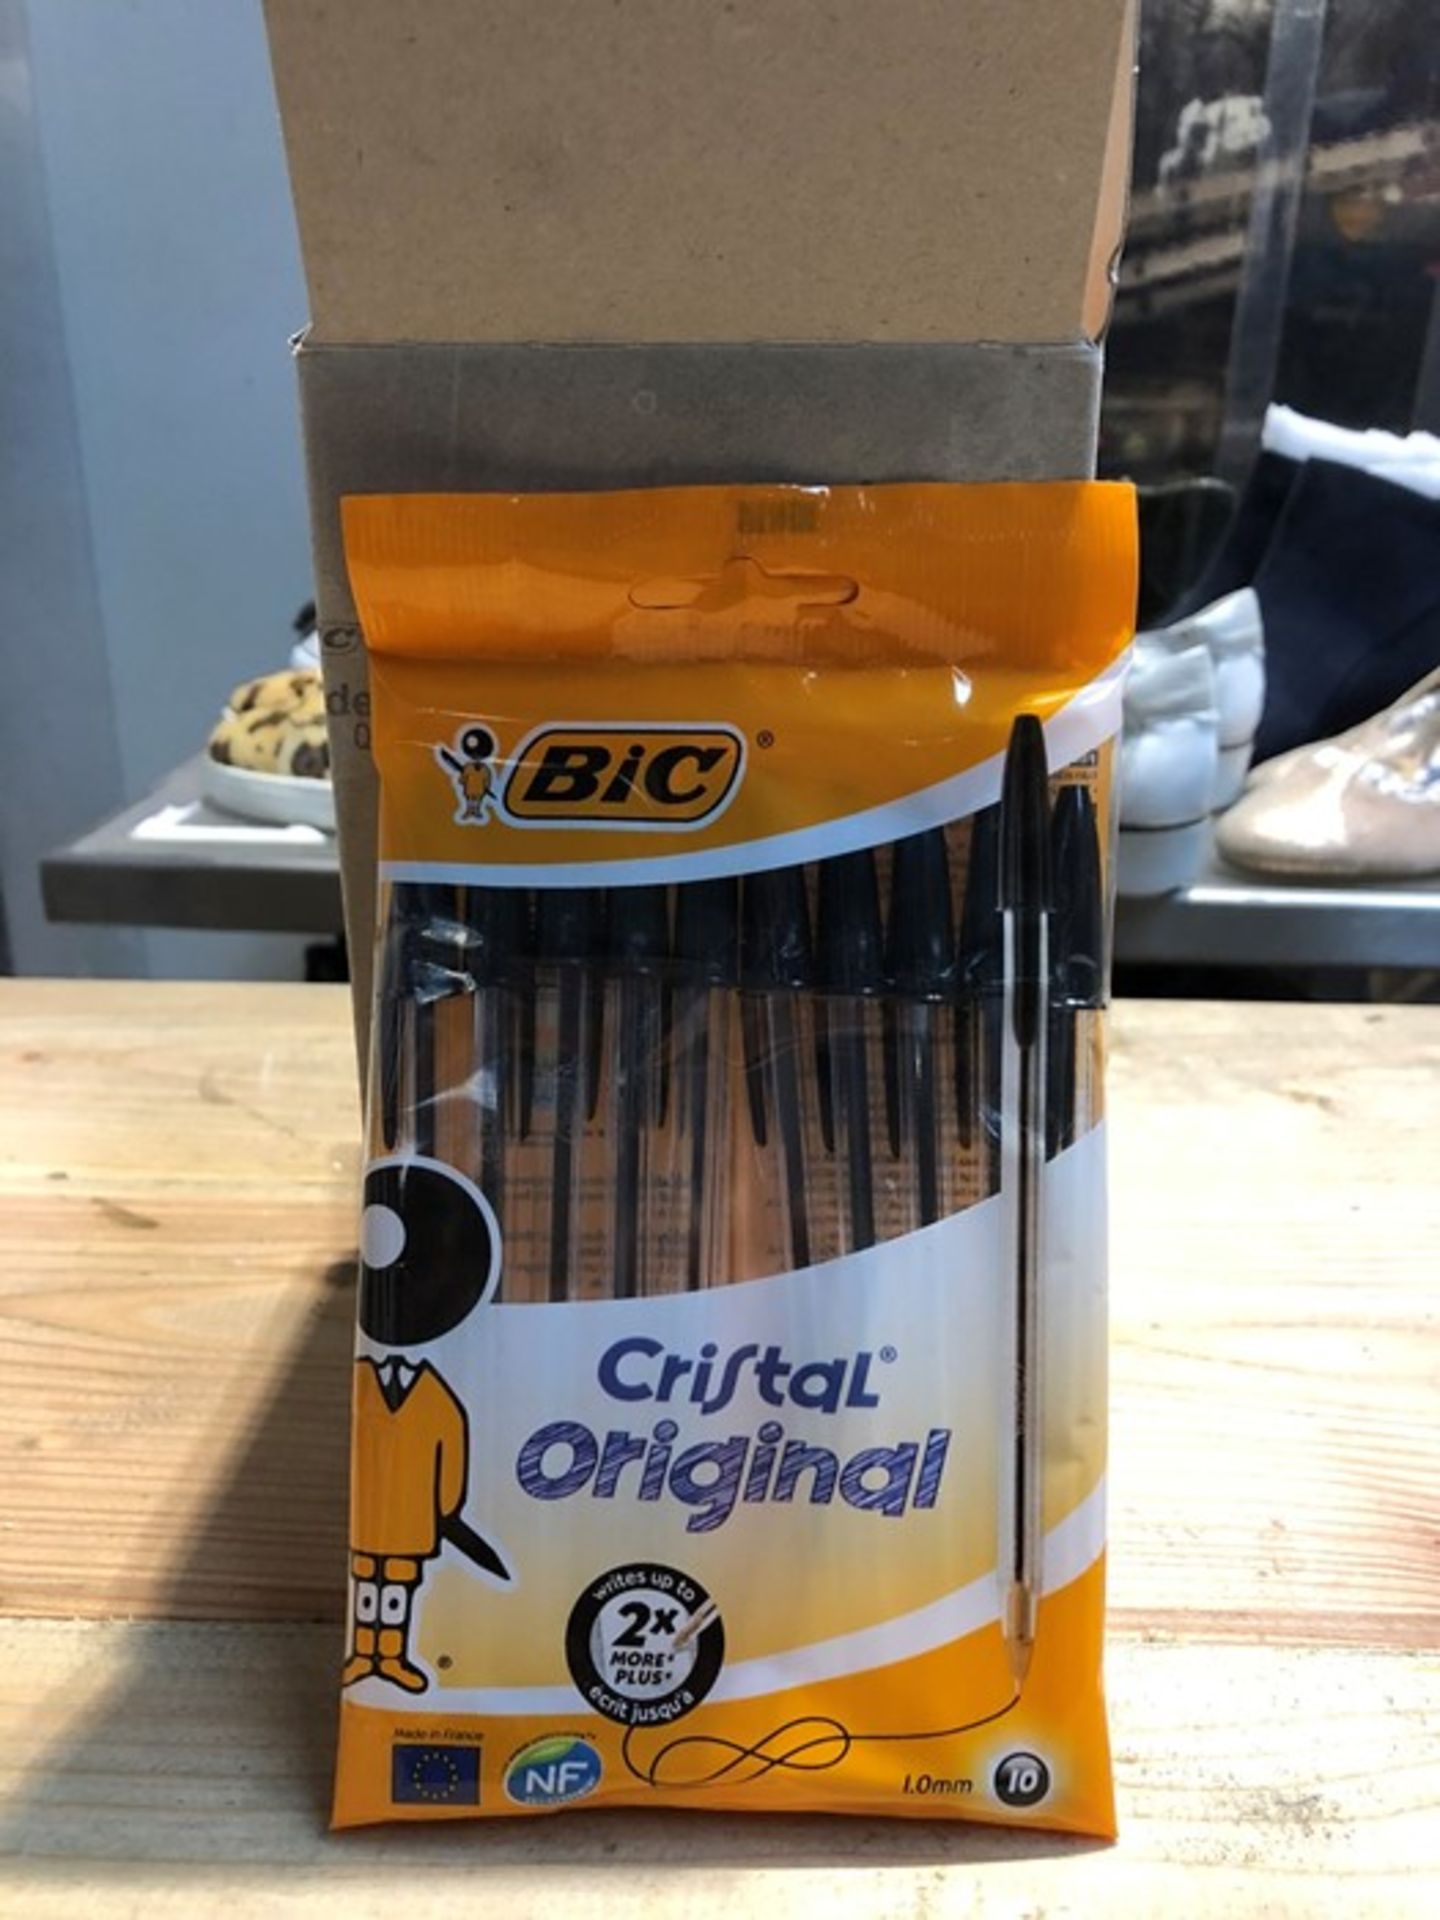 1 BOX TO CONTAIN APPROX 10 PACKS OF BIC ORIGINAL PENS - 10 PENS PER PACK (PUBLIC VIEWING AVAILABLE)